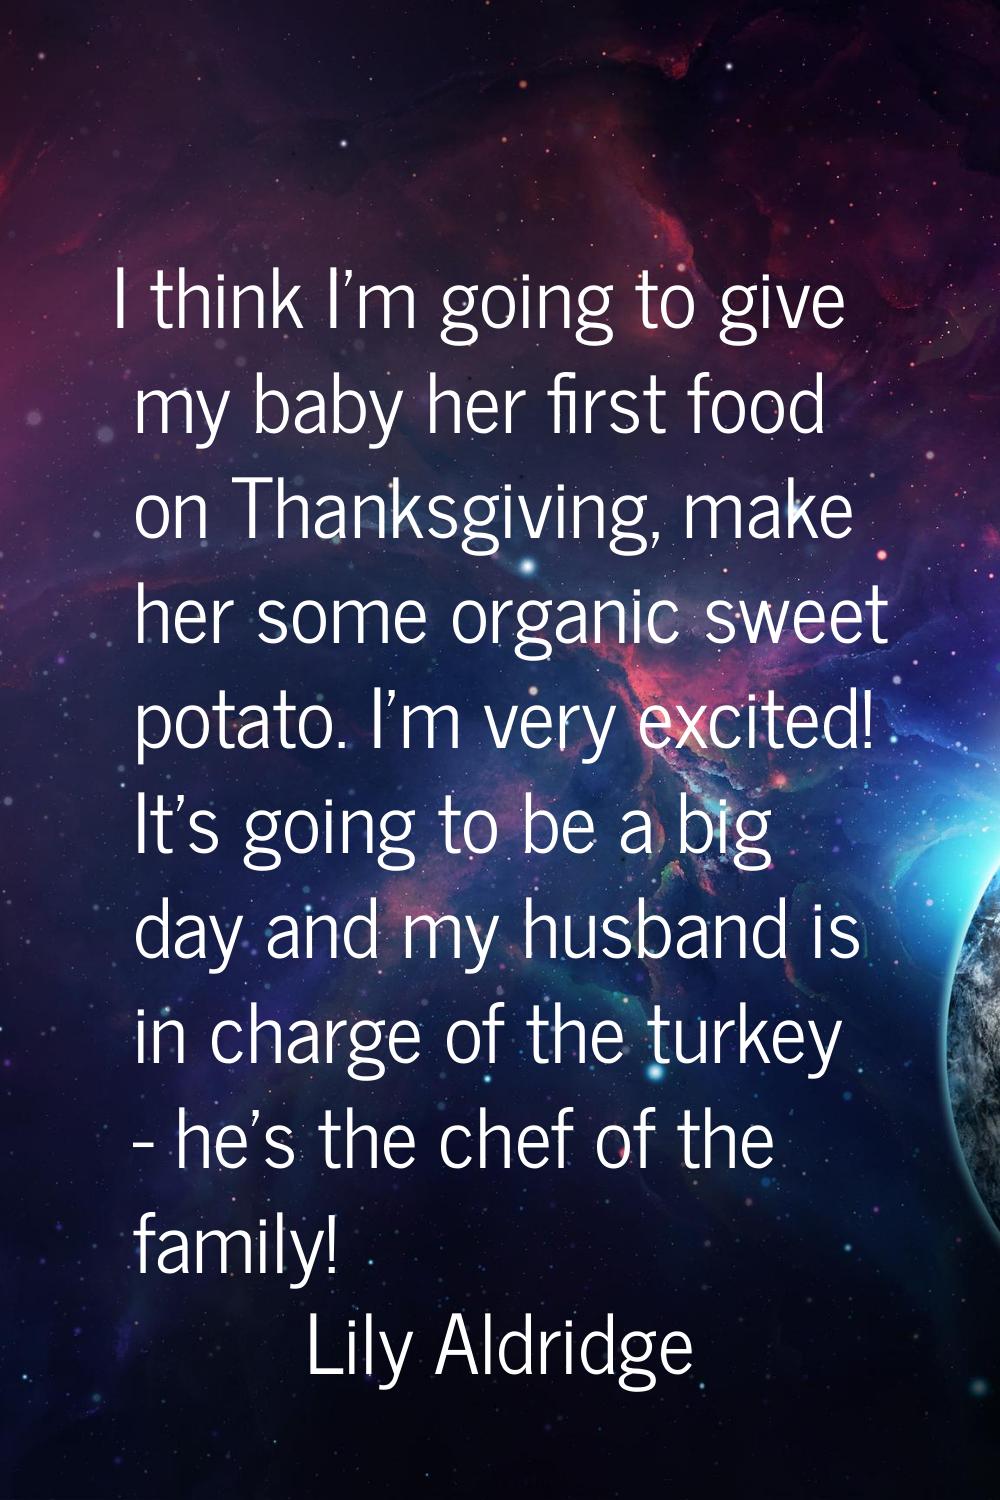 I think I'm going to give my baby her first food on Thanksgiving, make her some organic sweet potat